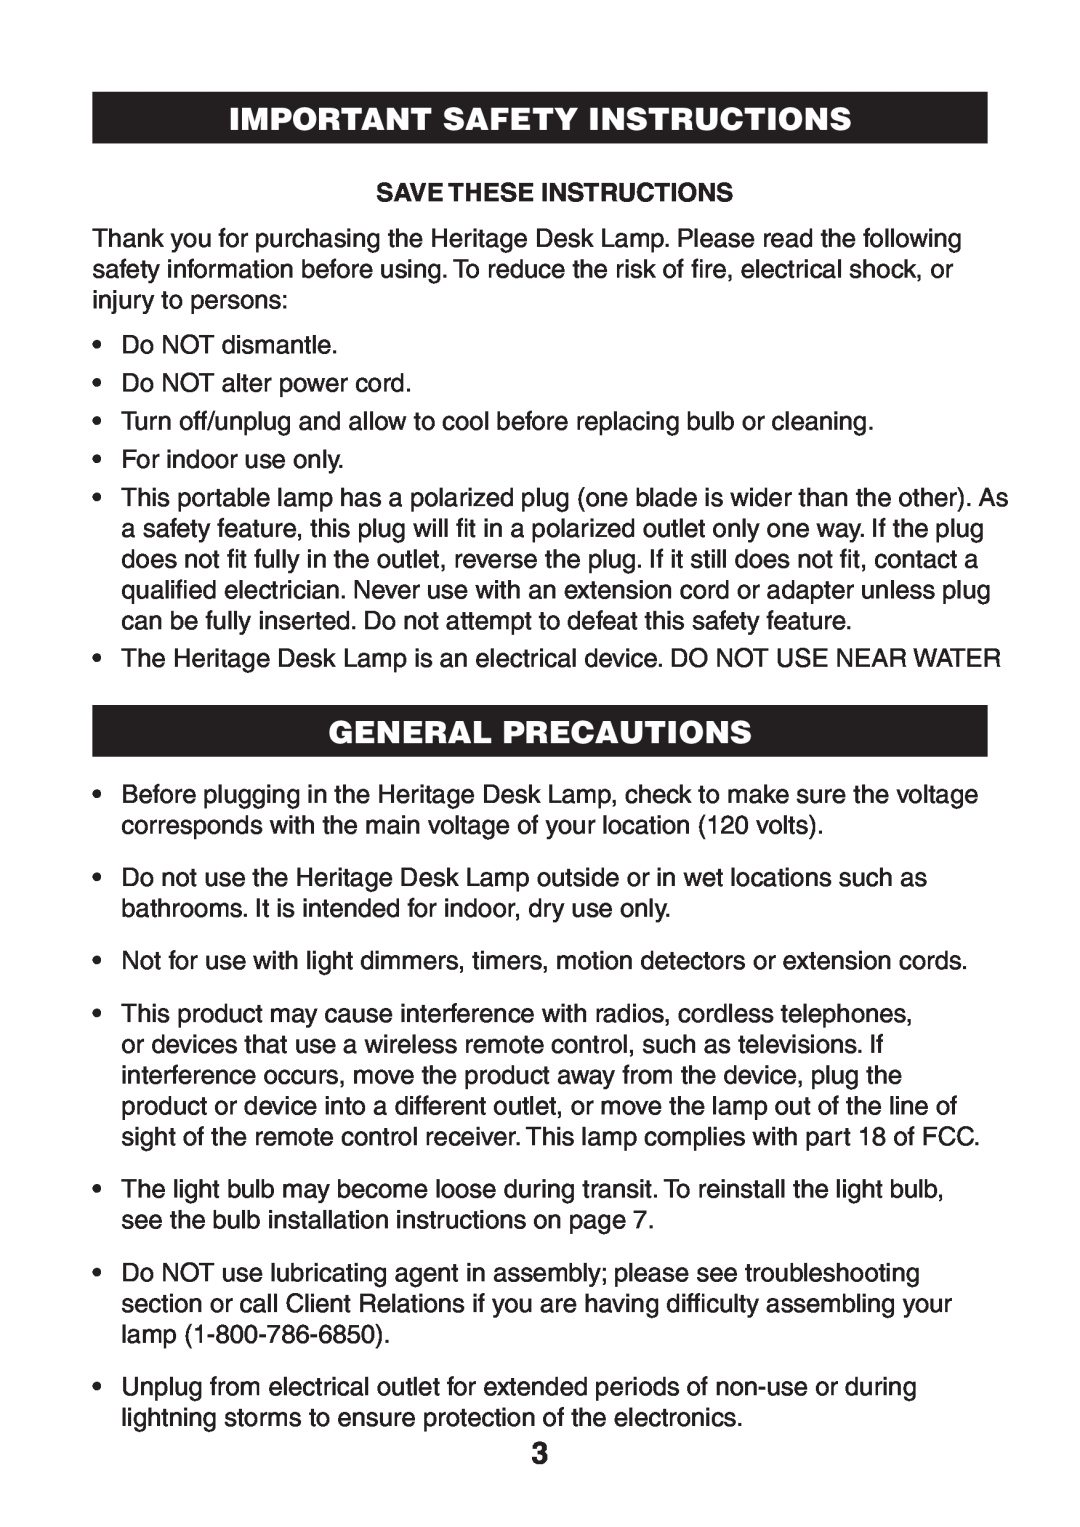 Verilux VD03 manual Important Safety Instructions, General Precautions, Save These Instructions 